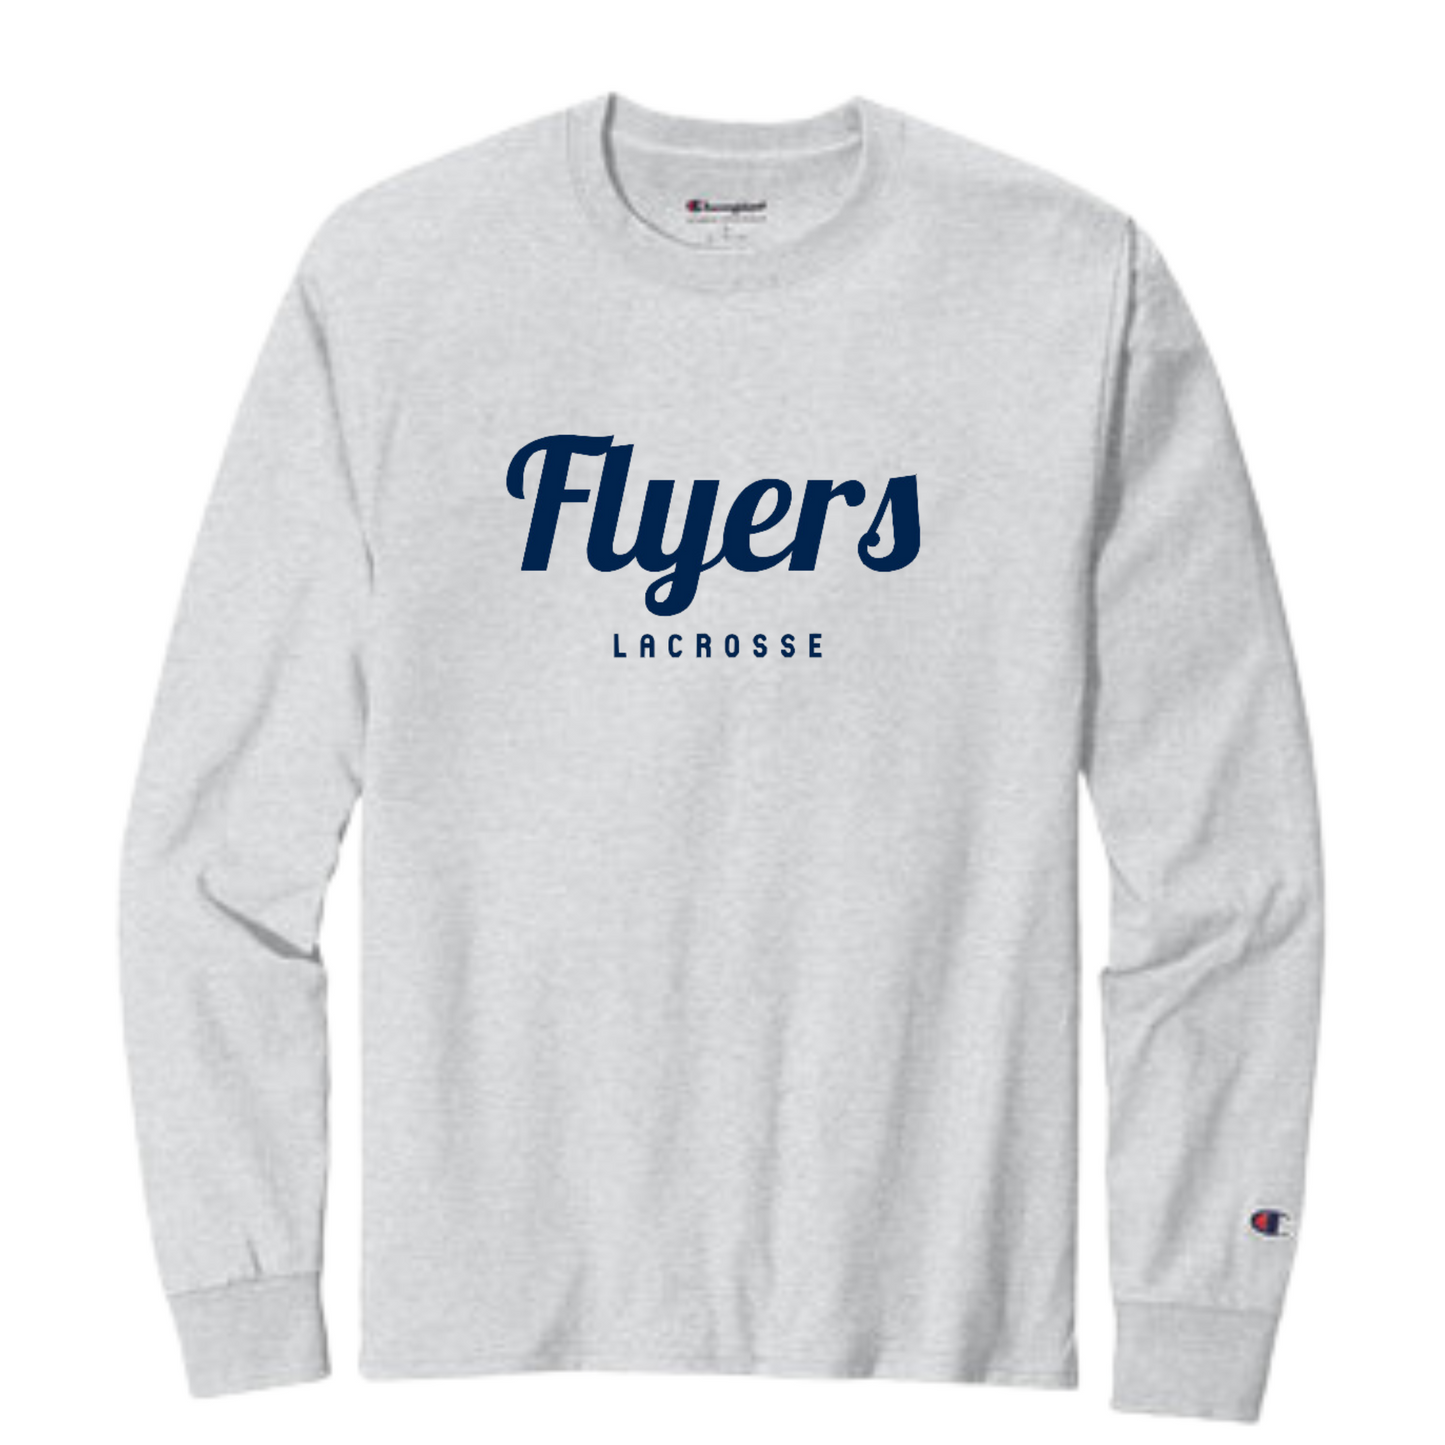 FRAMINGHAM YOUTH LACROSSE ADULT LONG-SLEEVE CHAMPION FLYERS TEE - ASH GRAY